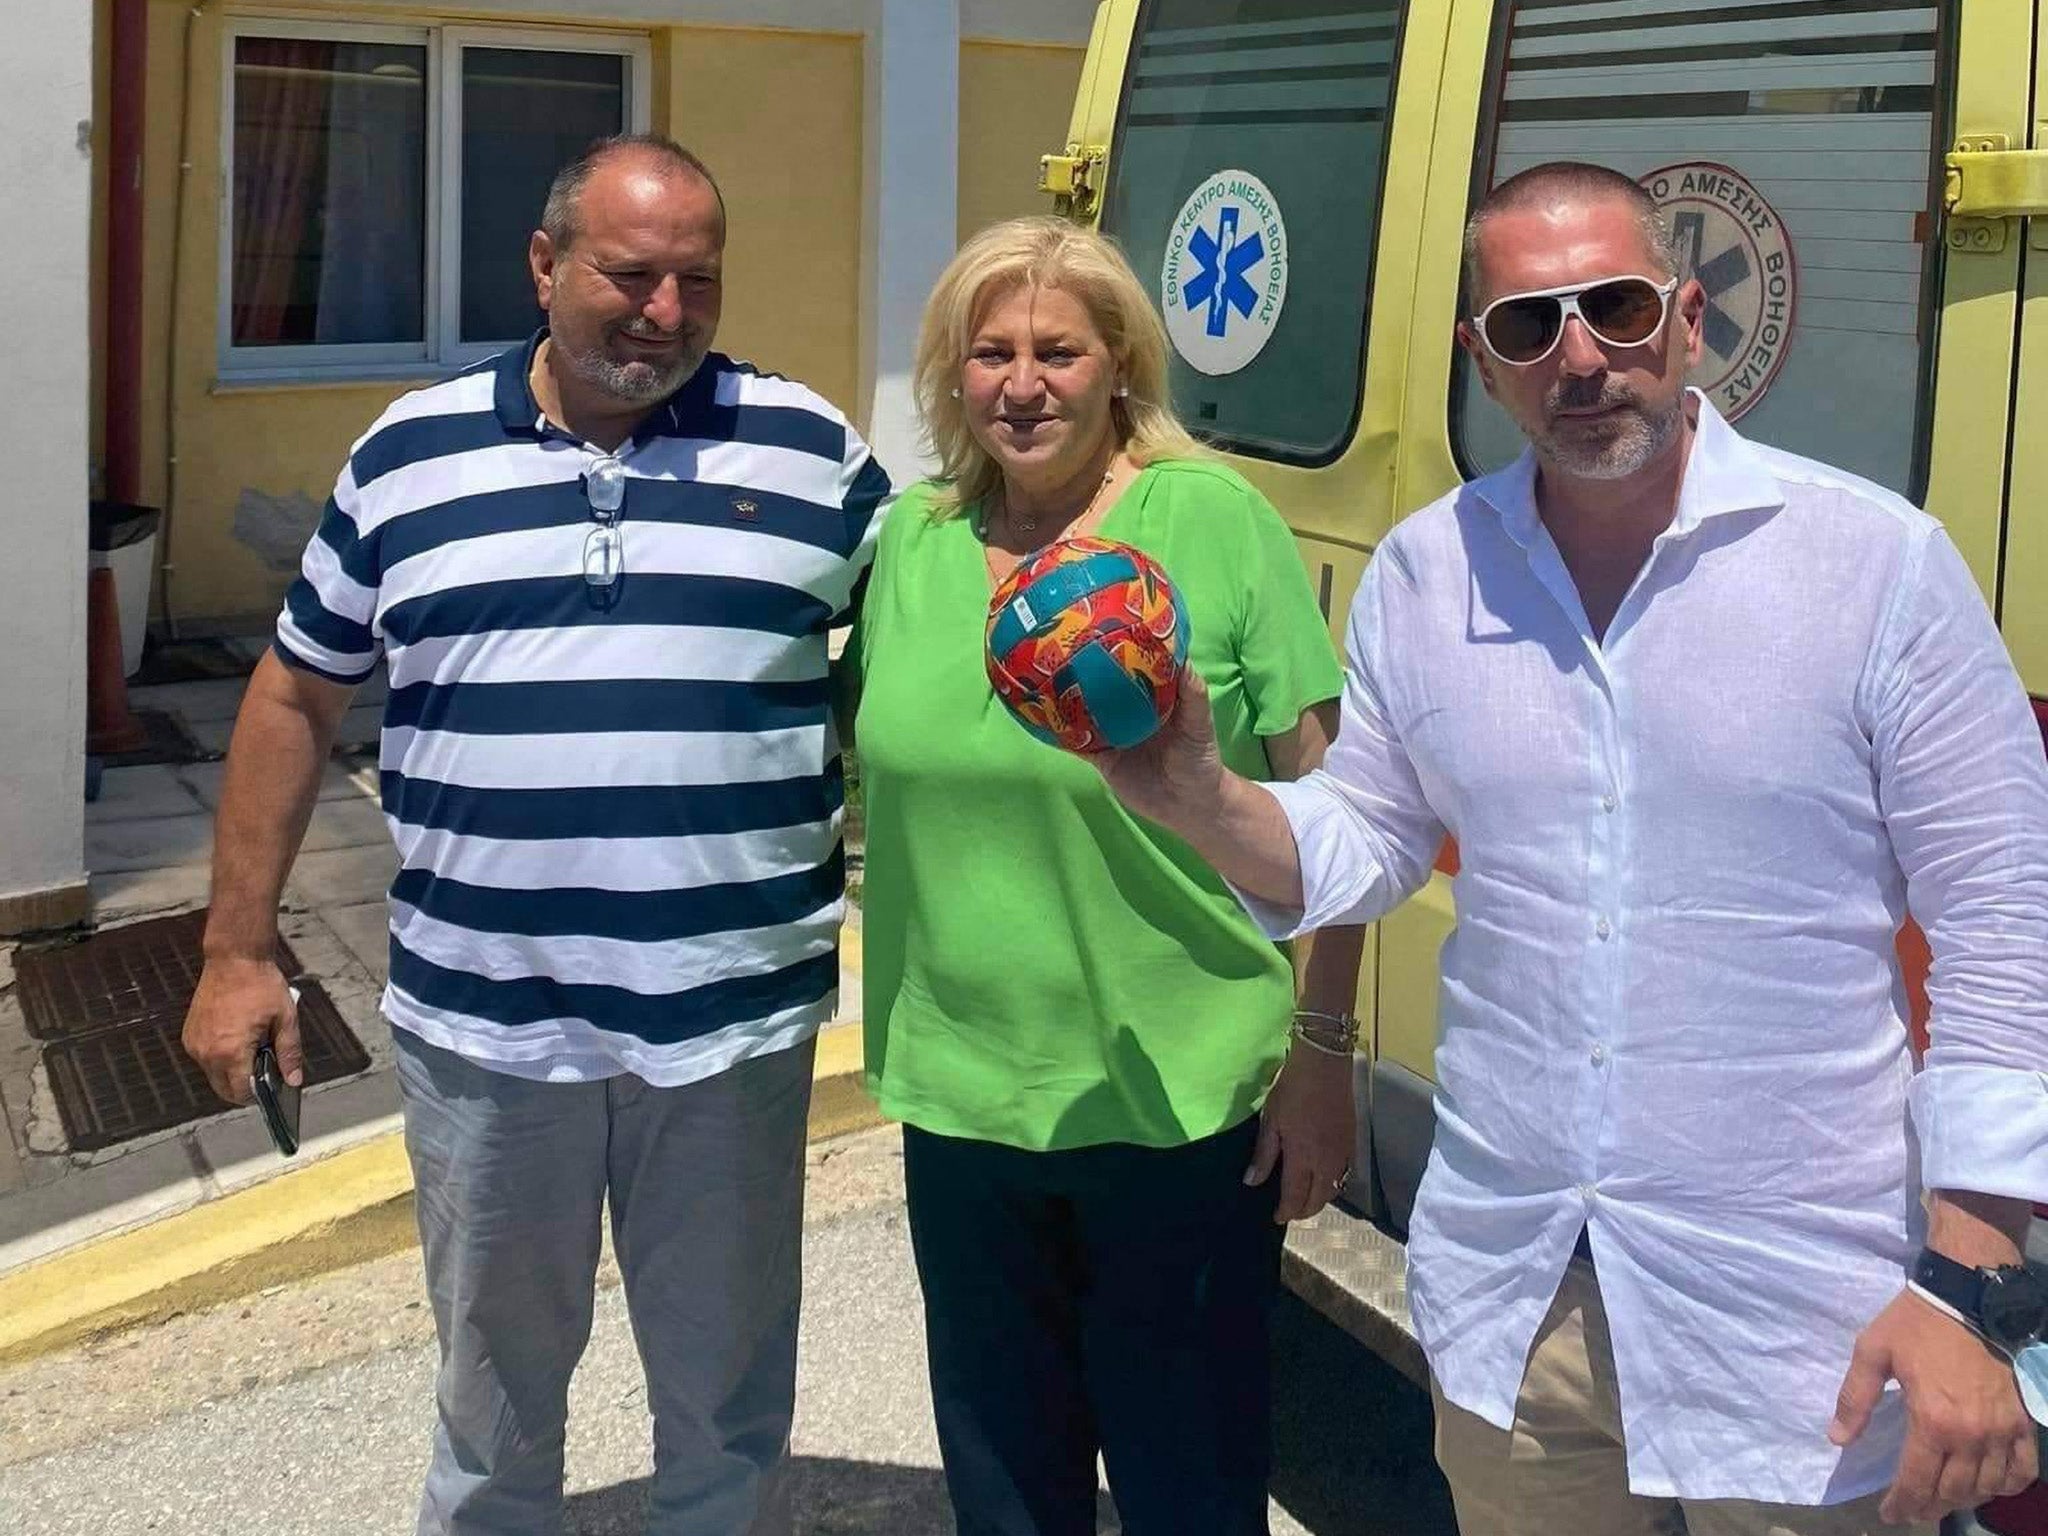 Ivan (r), who went missing off the coast of Myti beach, with his father (l) and the mayor of Kassandra, Anastasia Chalkia